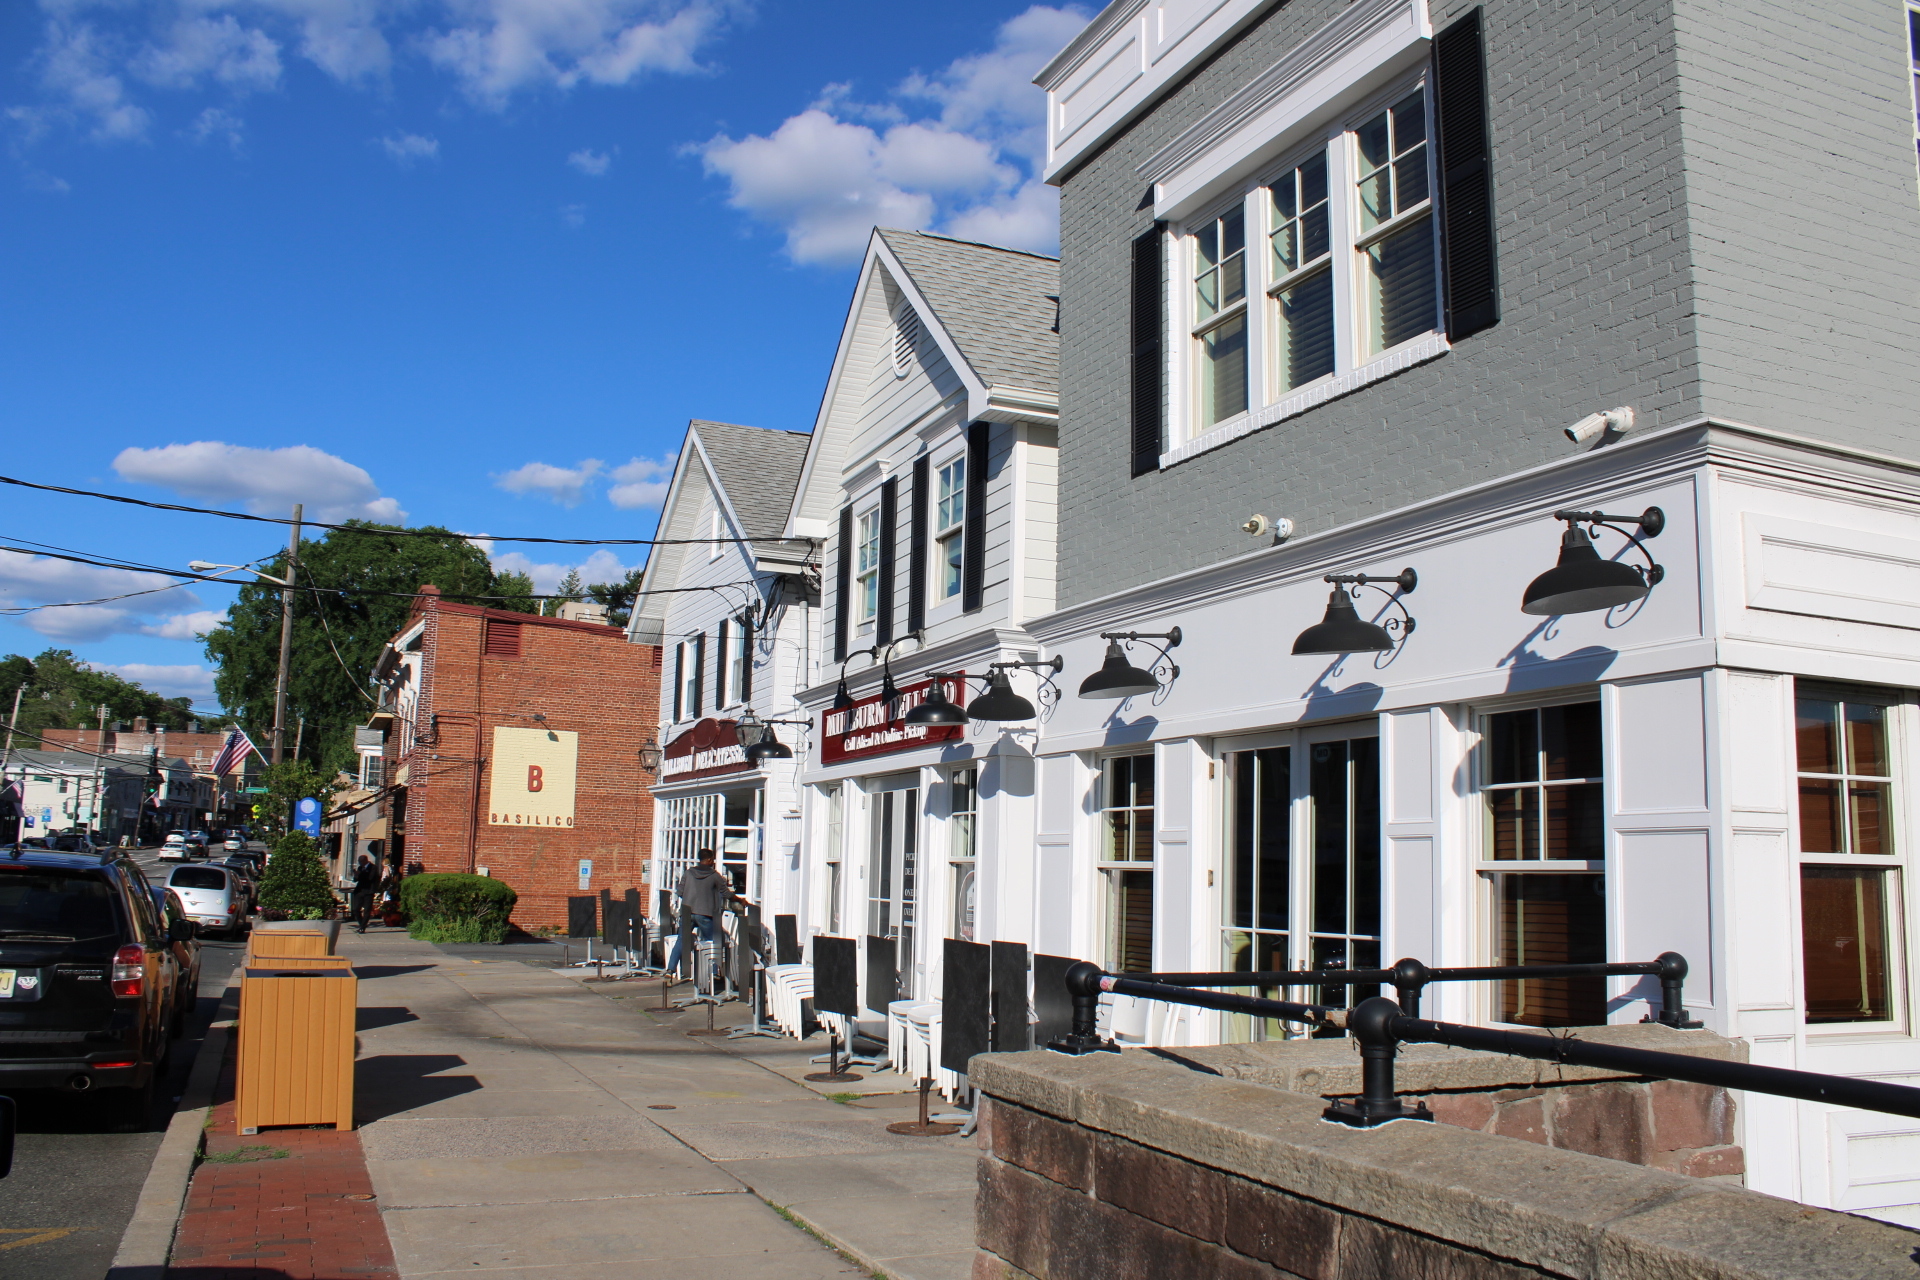 Street view of Downtown Millburn, NJ shops and historic buildings